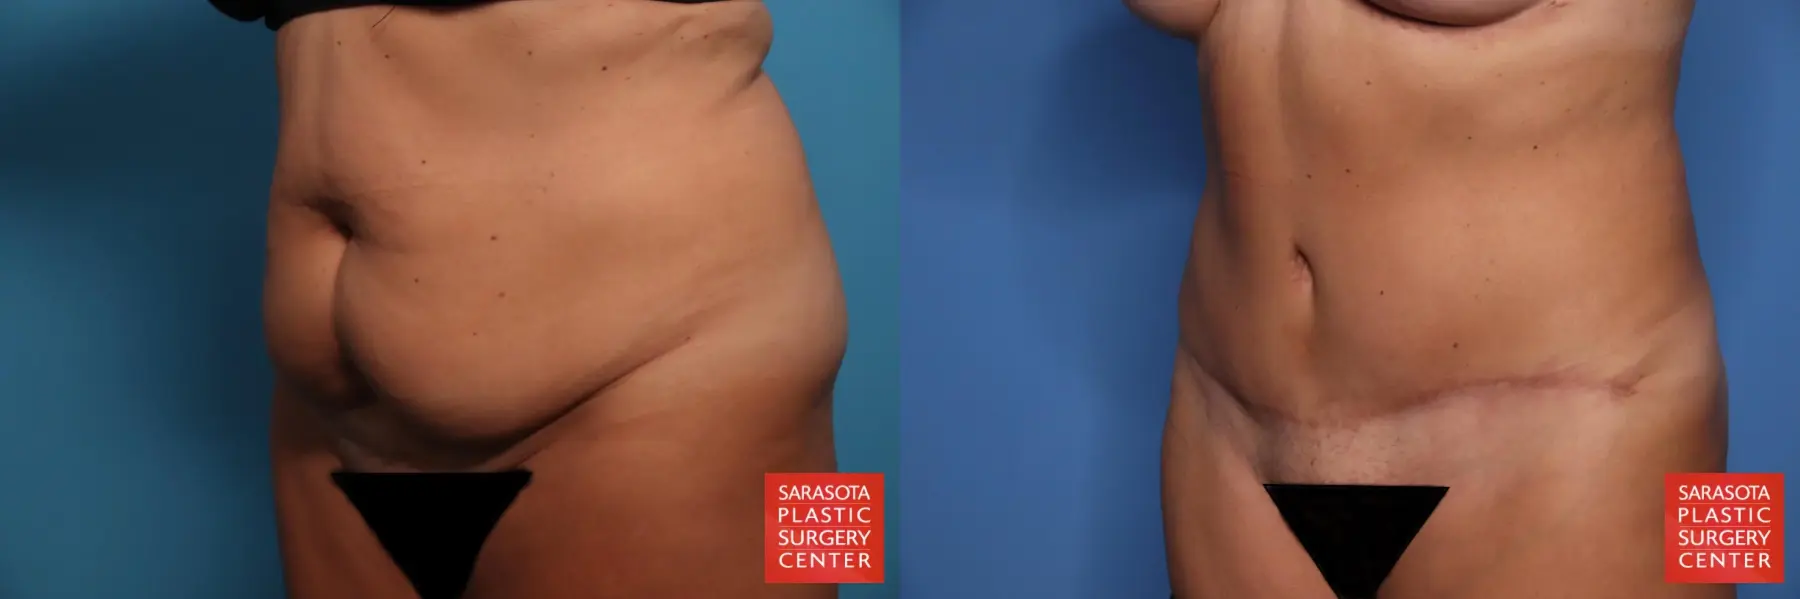 Tummy Tuck: Patient 27 - Before and After 2